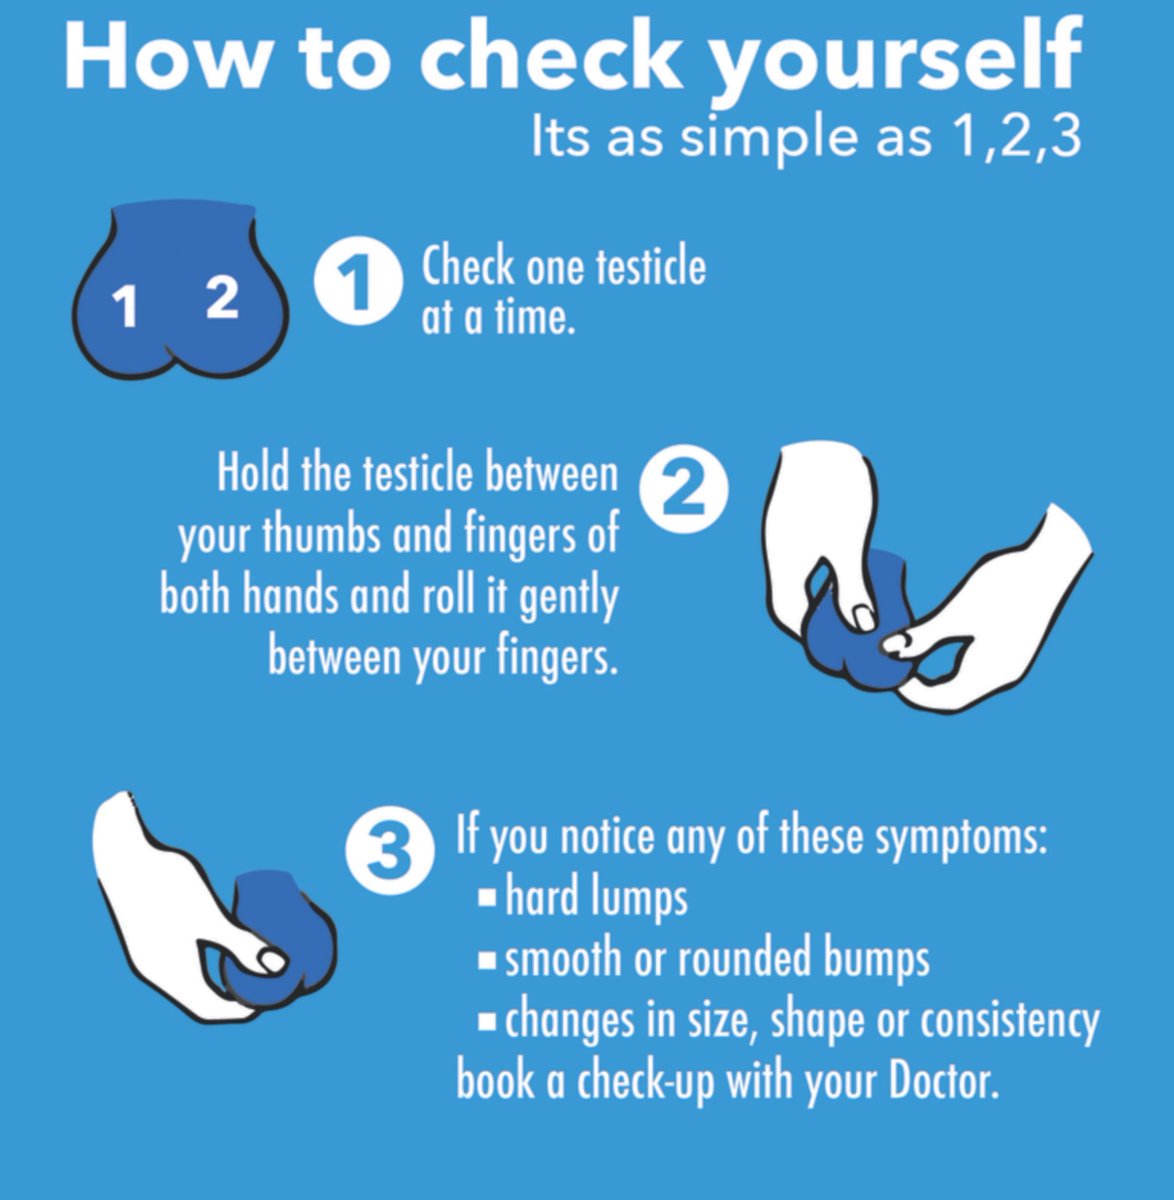 👨‍⚕️ Gentlemen, here's your reminder to prioritize your health. Regular self-checks for testicular cancer are simple but crucial. Take a moment today to ensure everything is in check – your well-being matters! 🩹💙 #TesticularHealth #SelfCheck #MensHealth